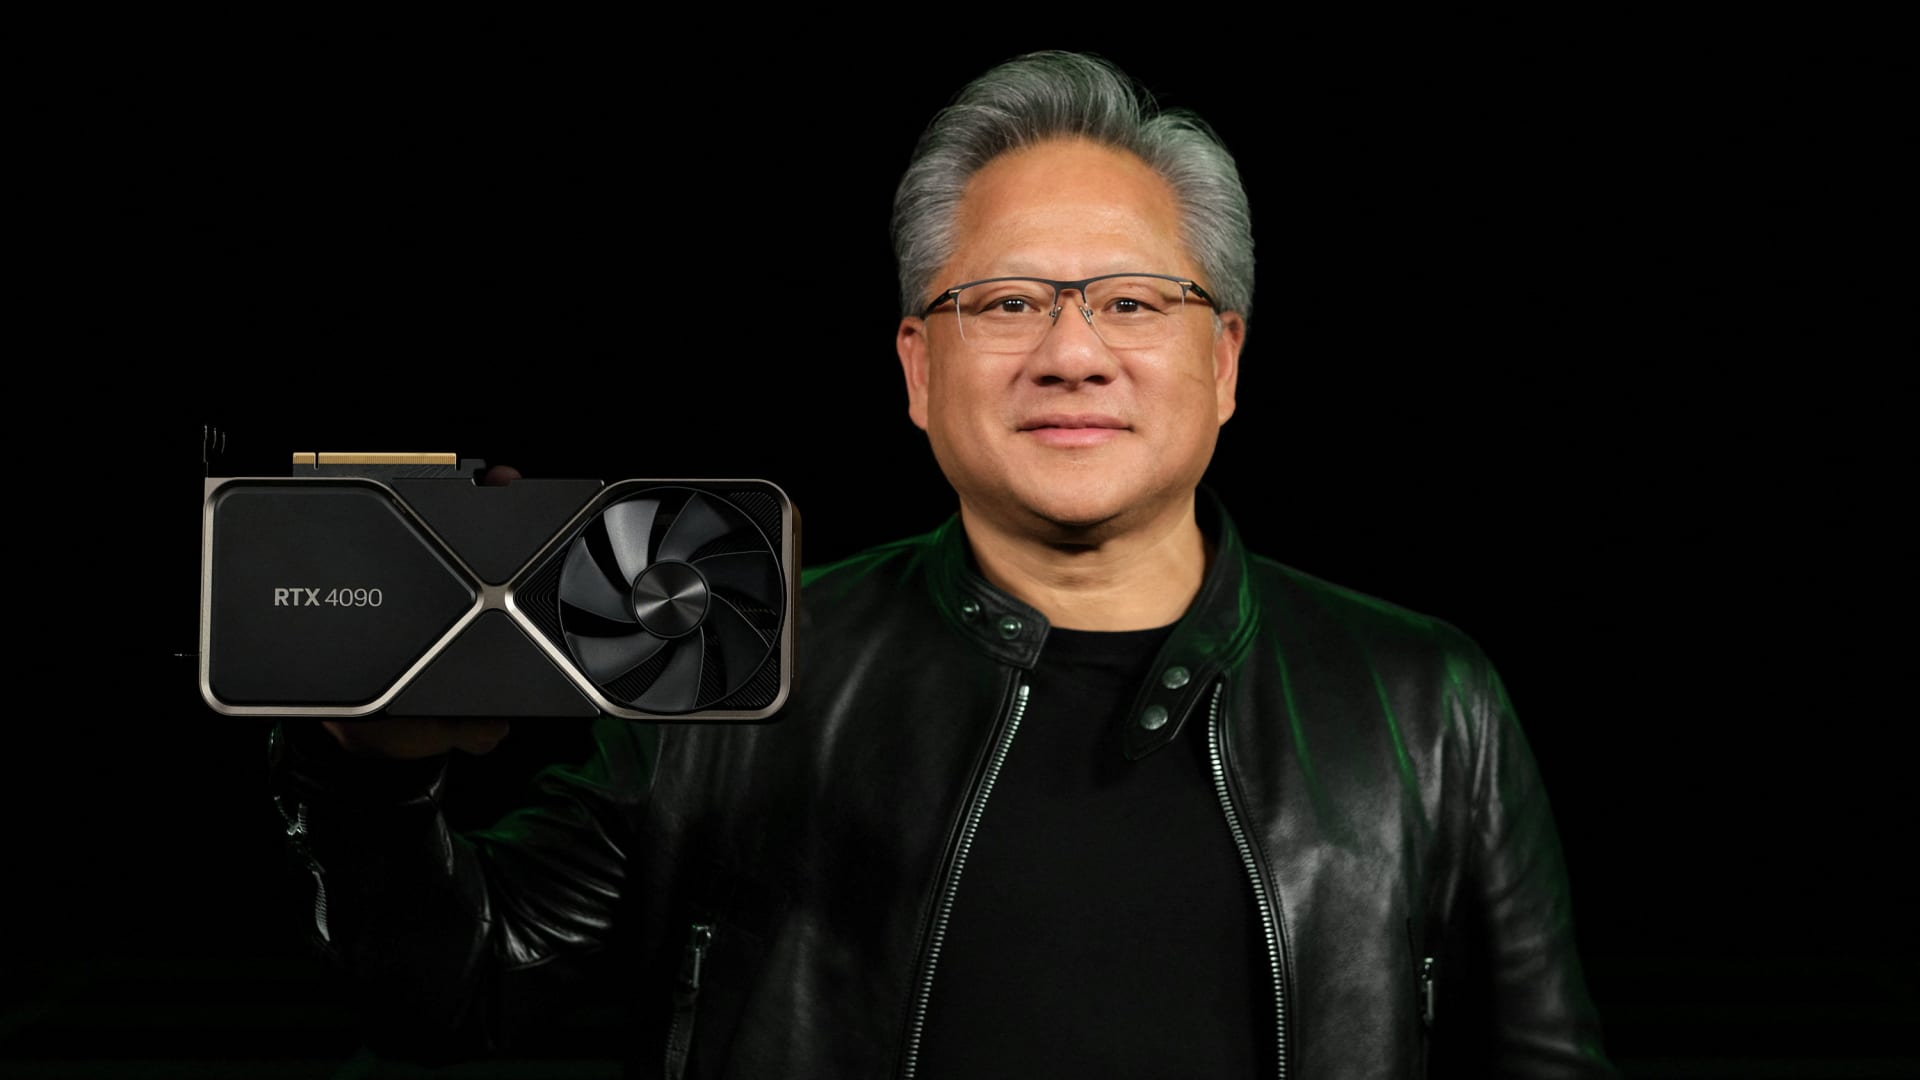 Nvidia Corp CEO Jensen Huang holds one of the company's new RTX 4090 chips for computer gaming in this undated handout photo provided September 20, 2022.